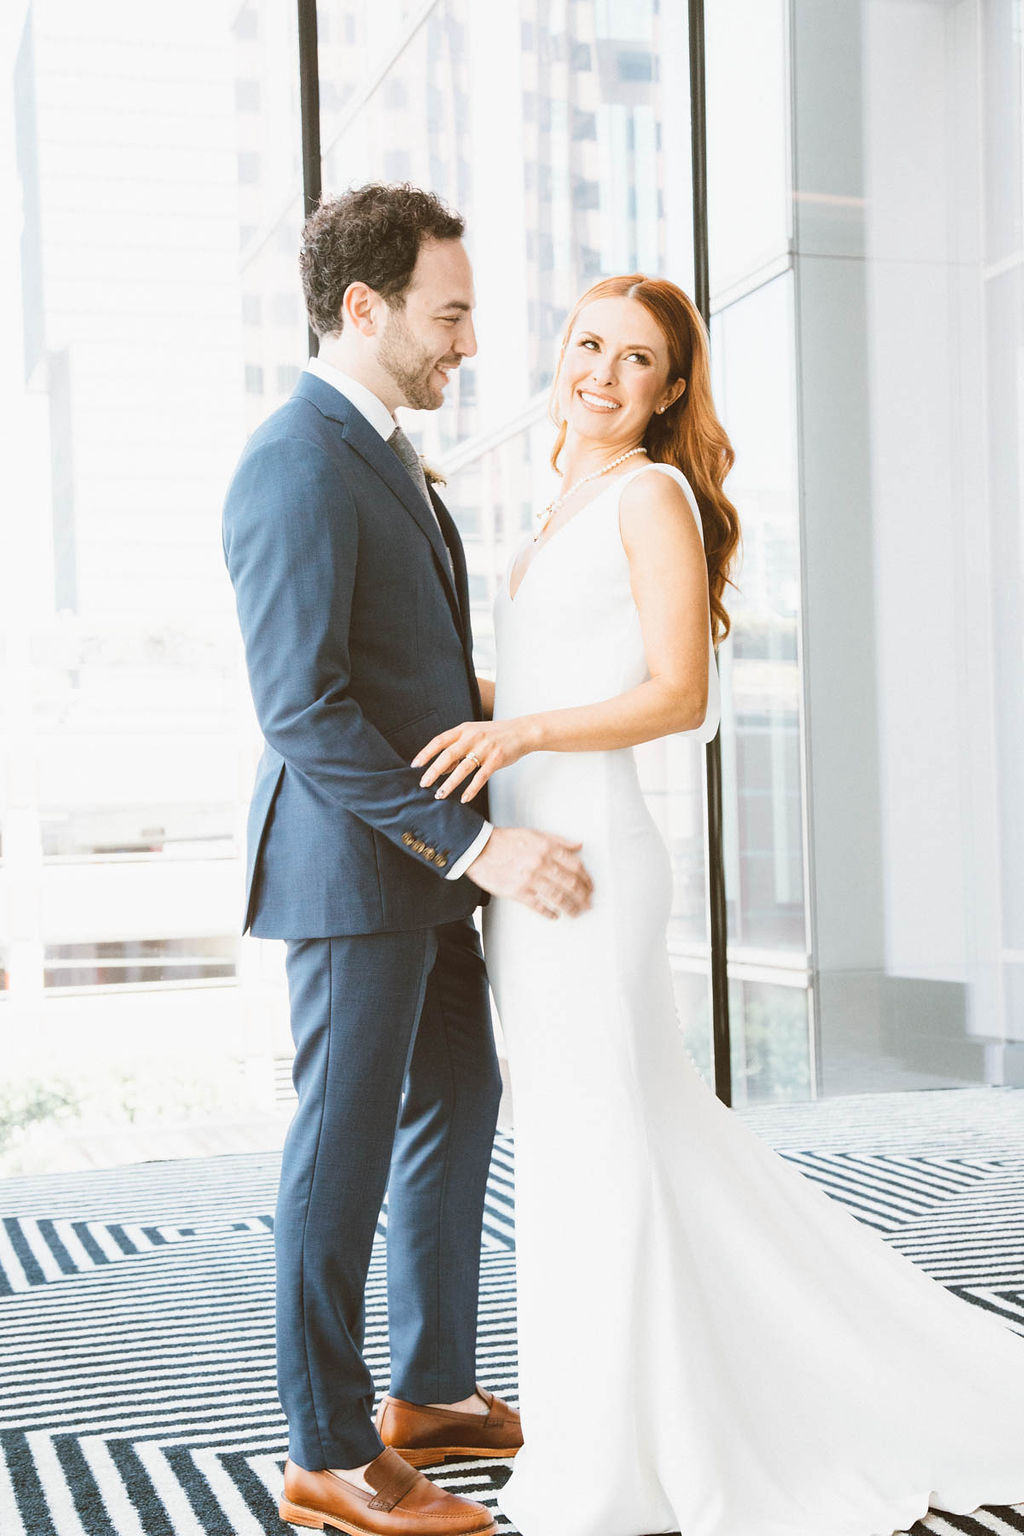 Cool and Chic Downtown Wedding in Los Angeles Liz Bretz11